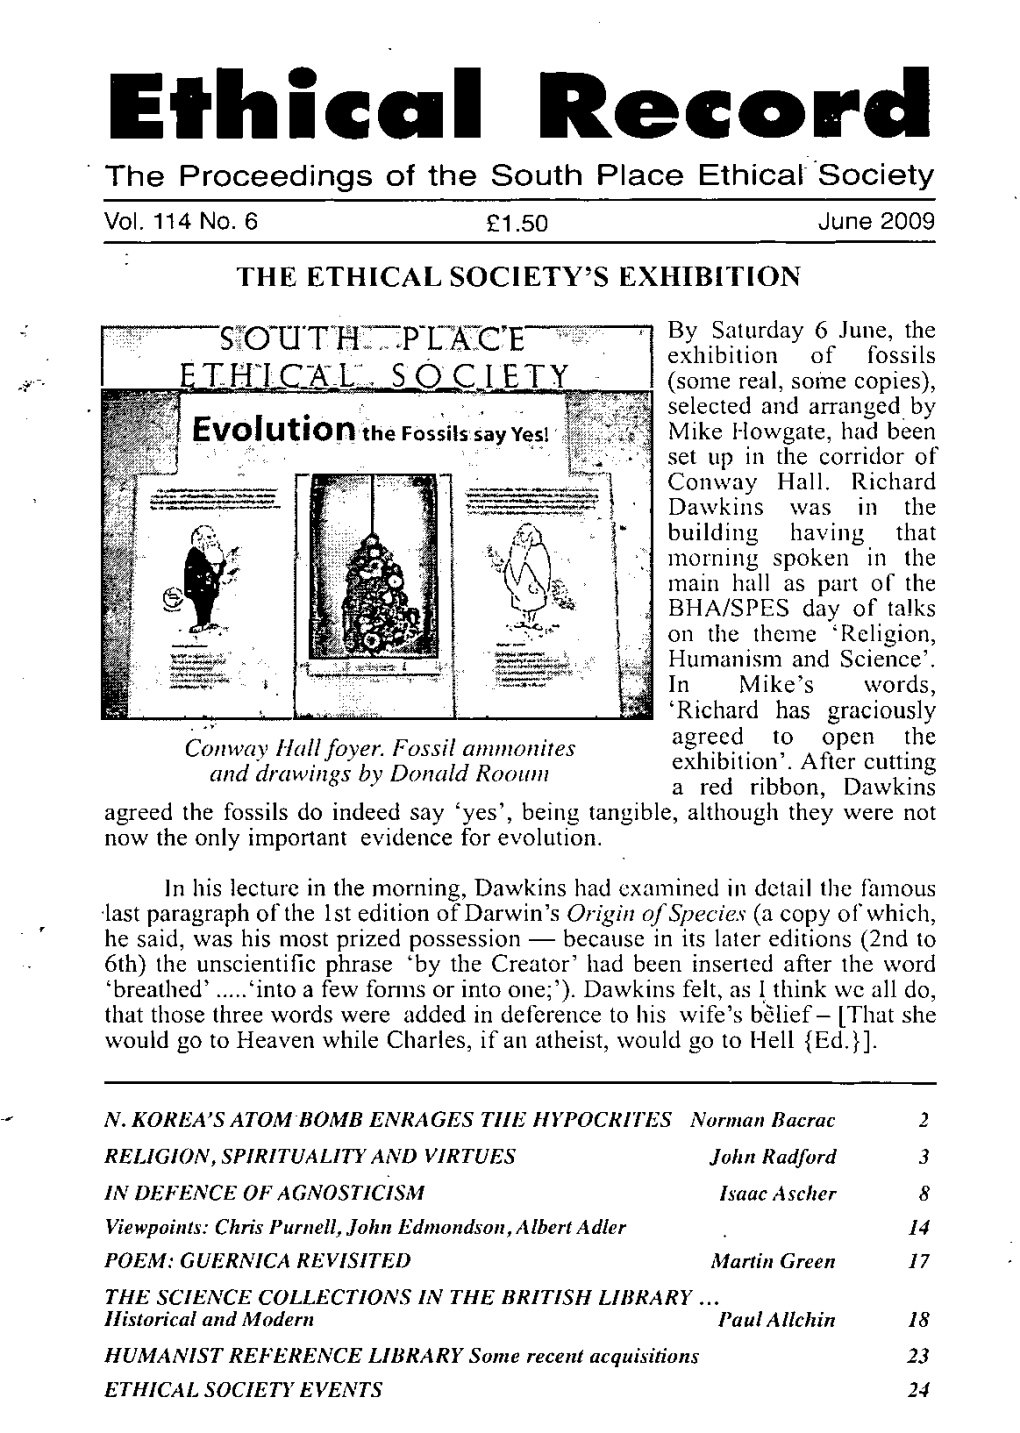 Ethical Record the Proceedings of the South Place Ethical Society Vol